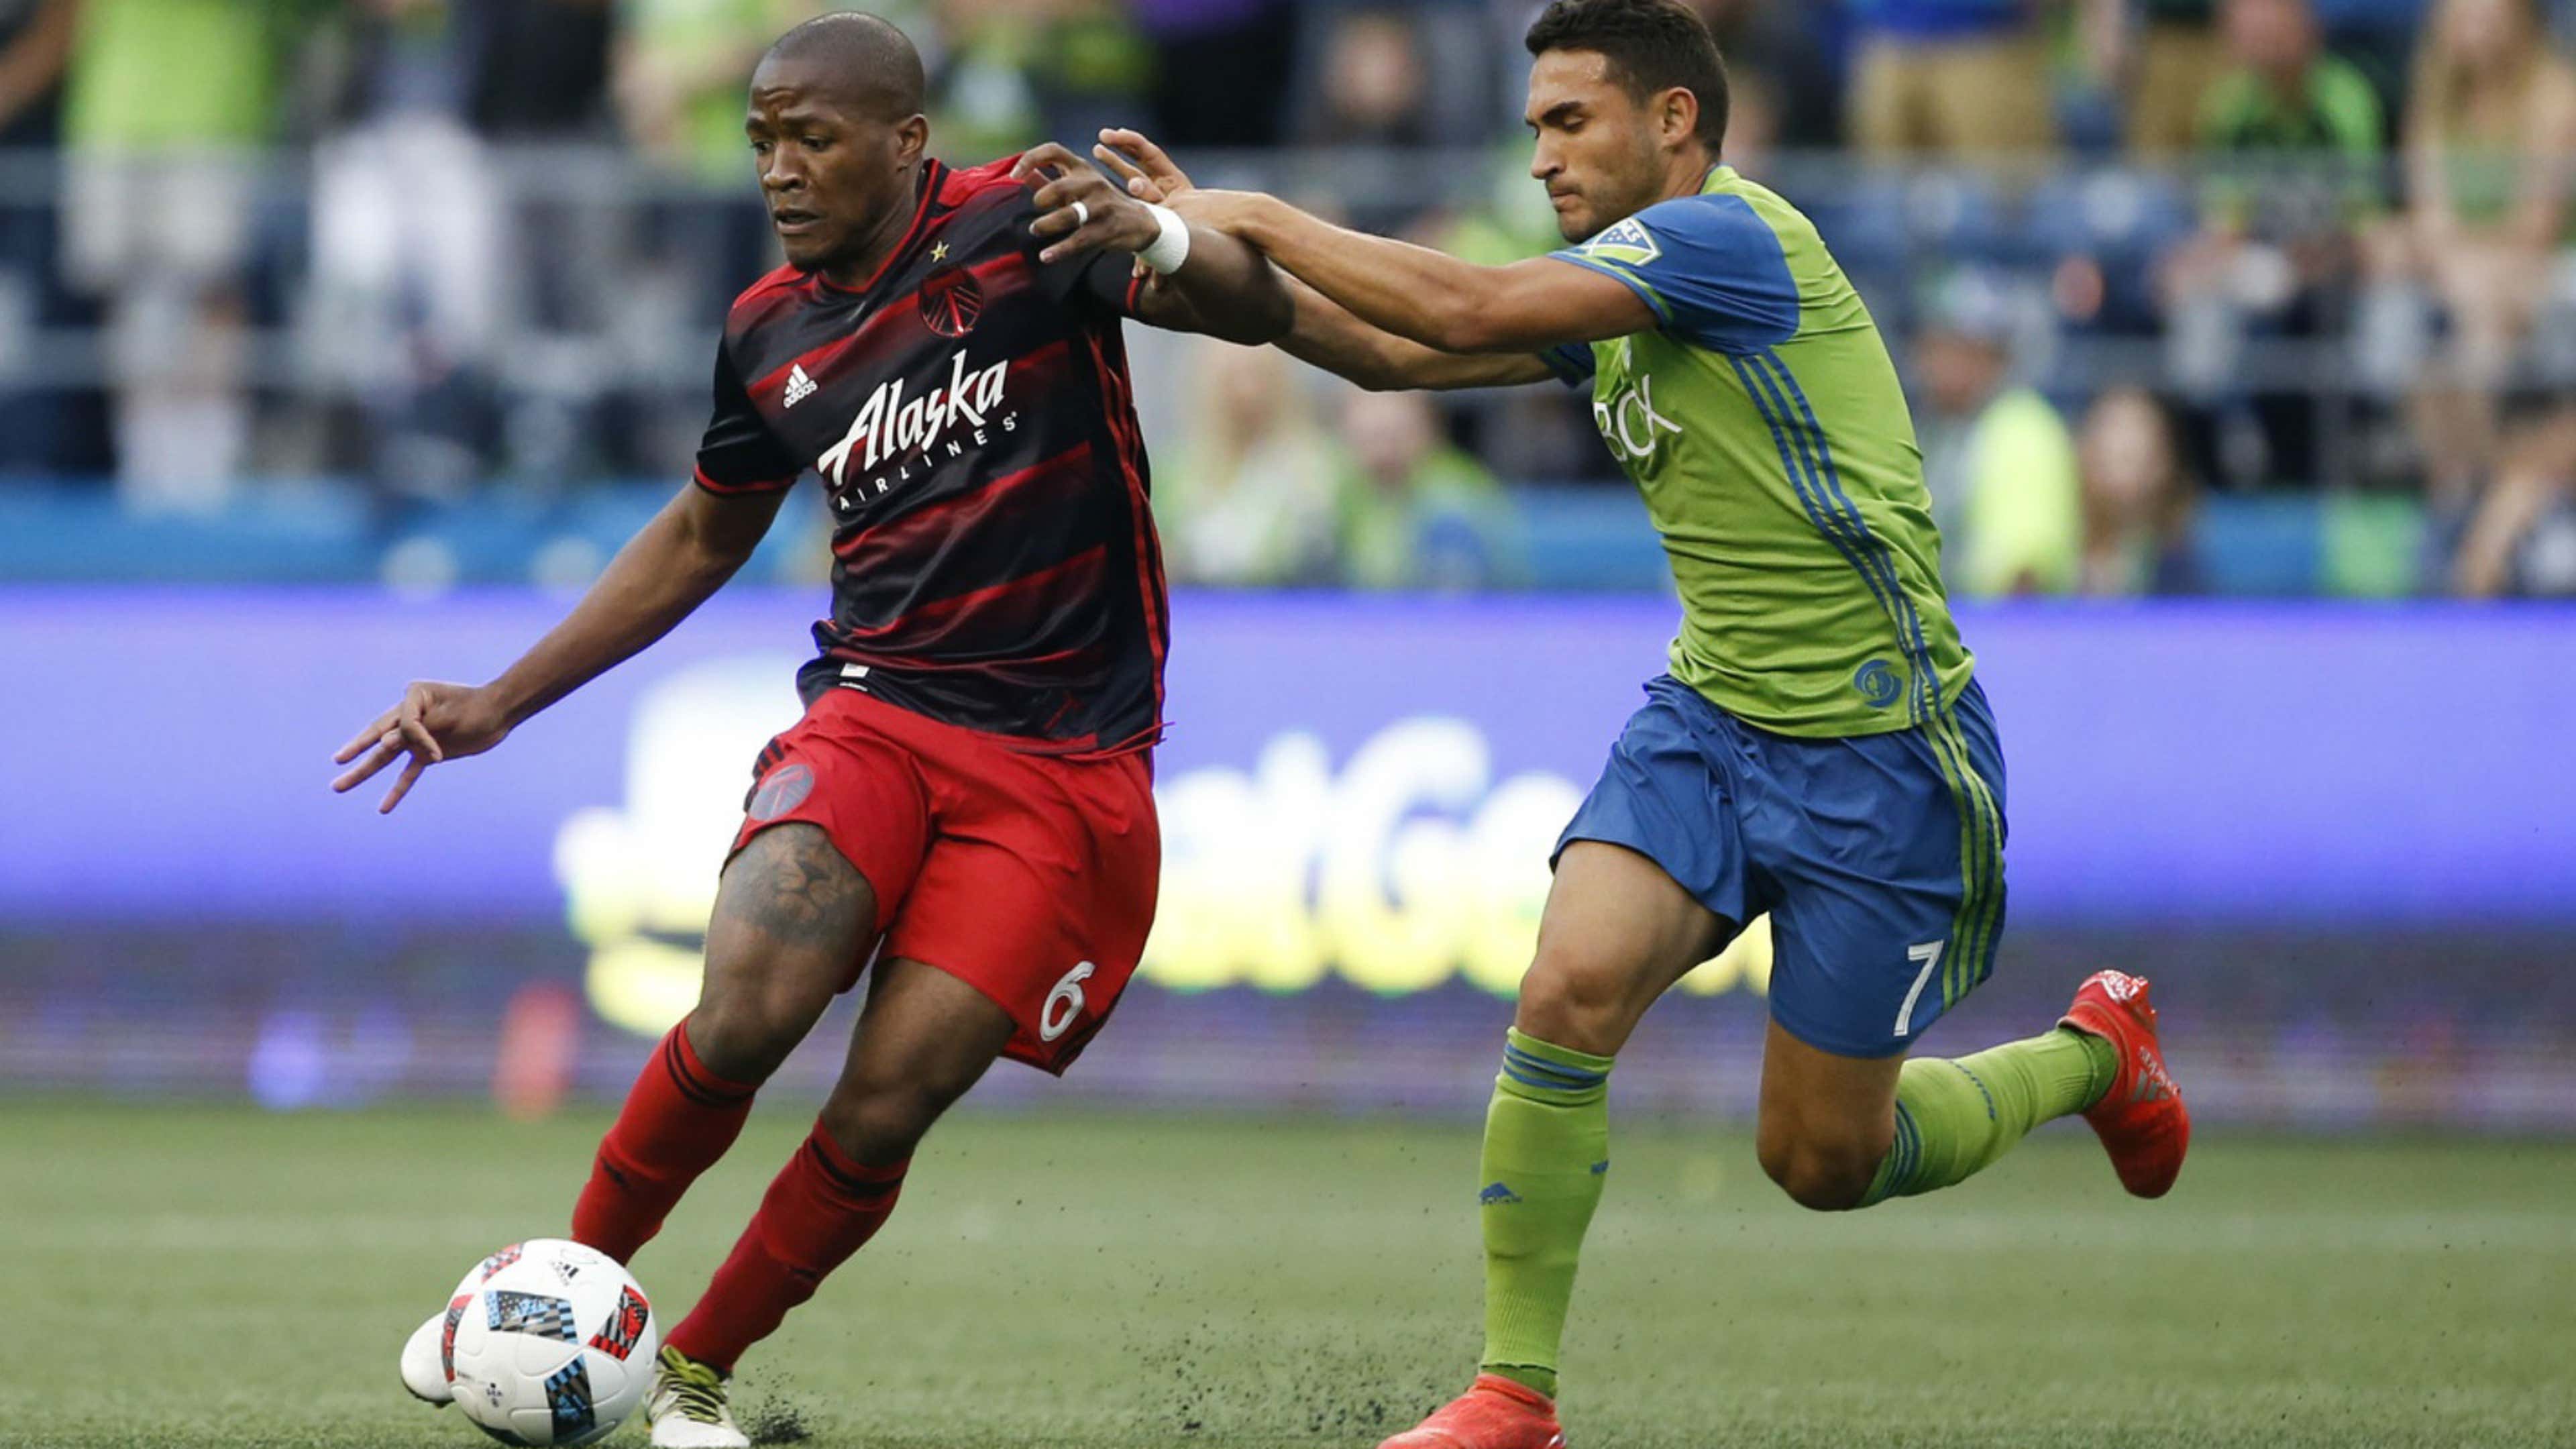 The MLS Wrap: American stars Michael Bradley and Clint Dempsey bring best  out of each other